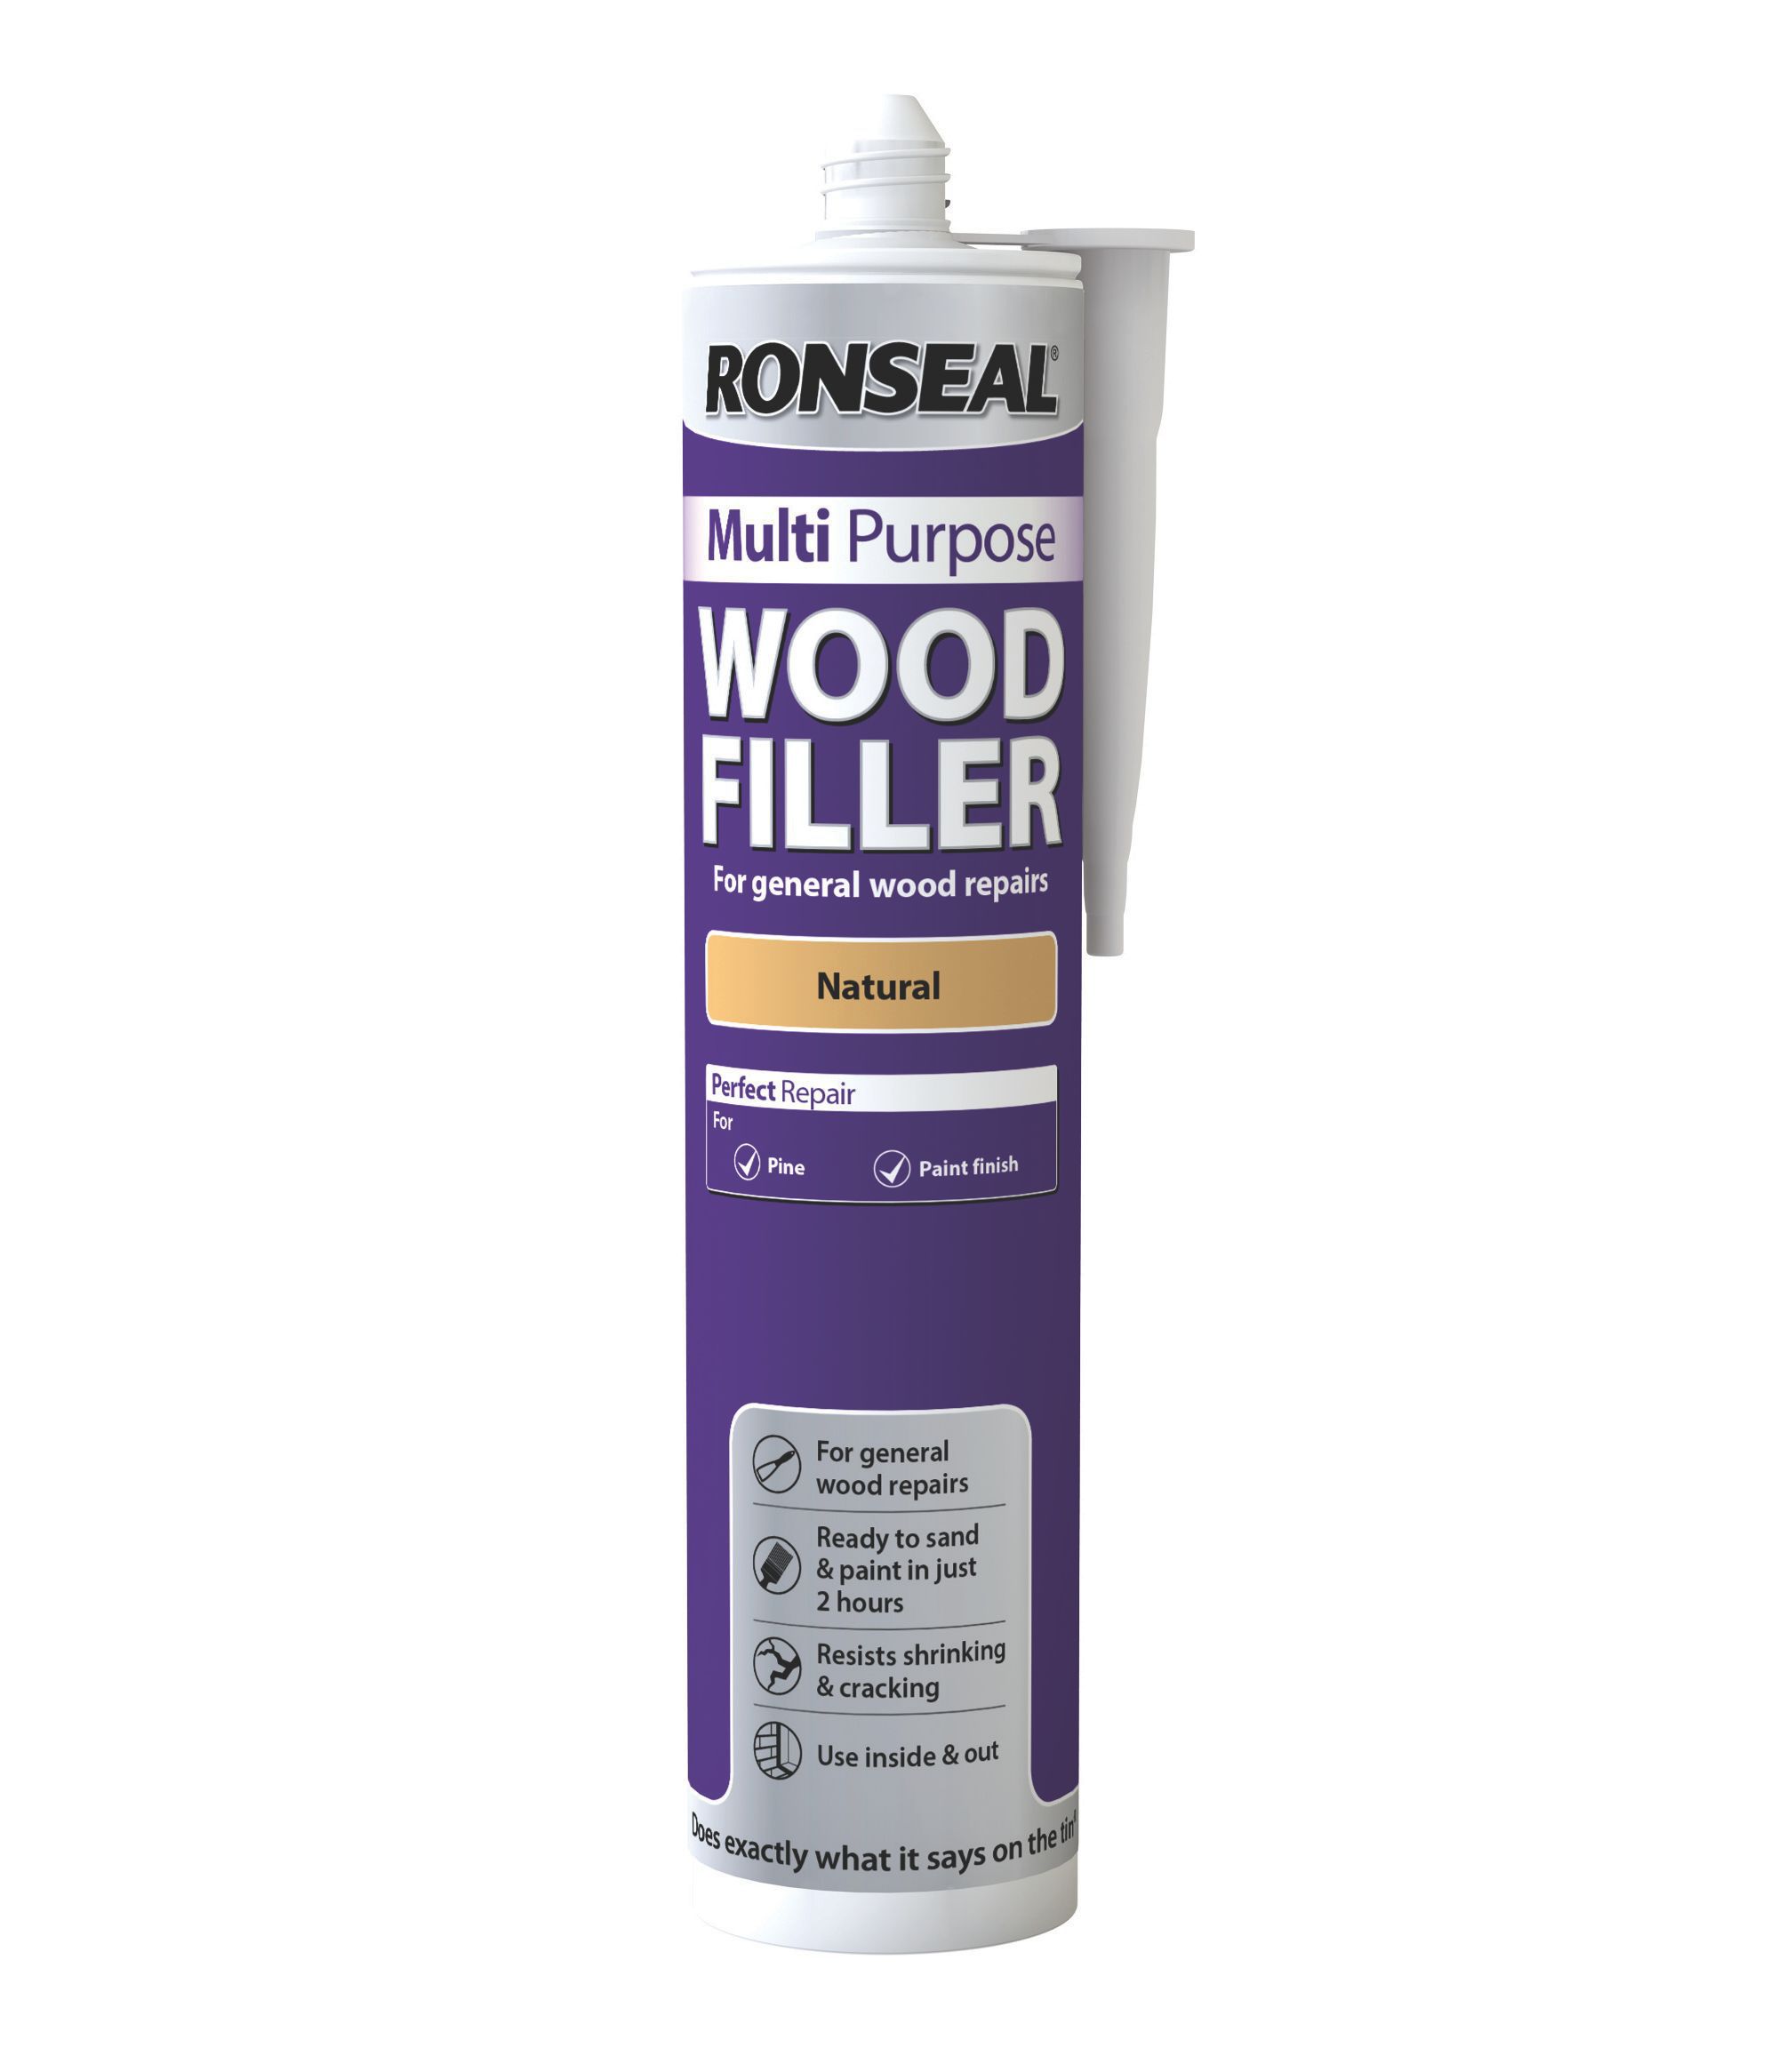 https://kingfisher.scene7.com/is/image/Kingfisher/ronseal-multi-purpose-light-ready-mixed-wood-filler~5010214833665_02c?$MOB_PREV$&$width=618&$height=618